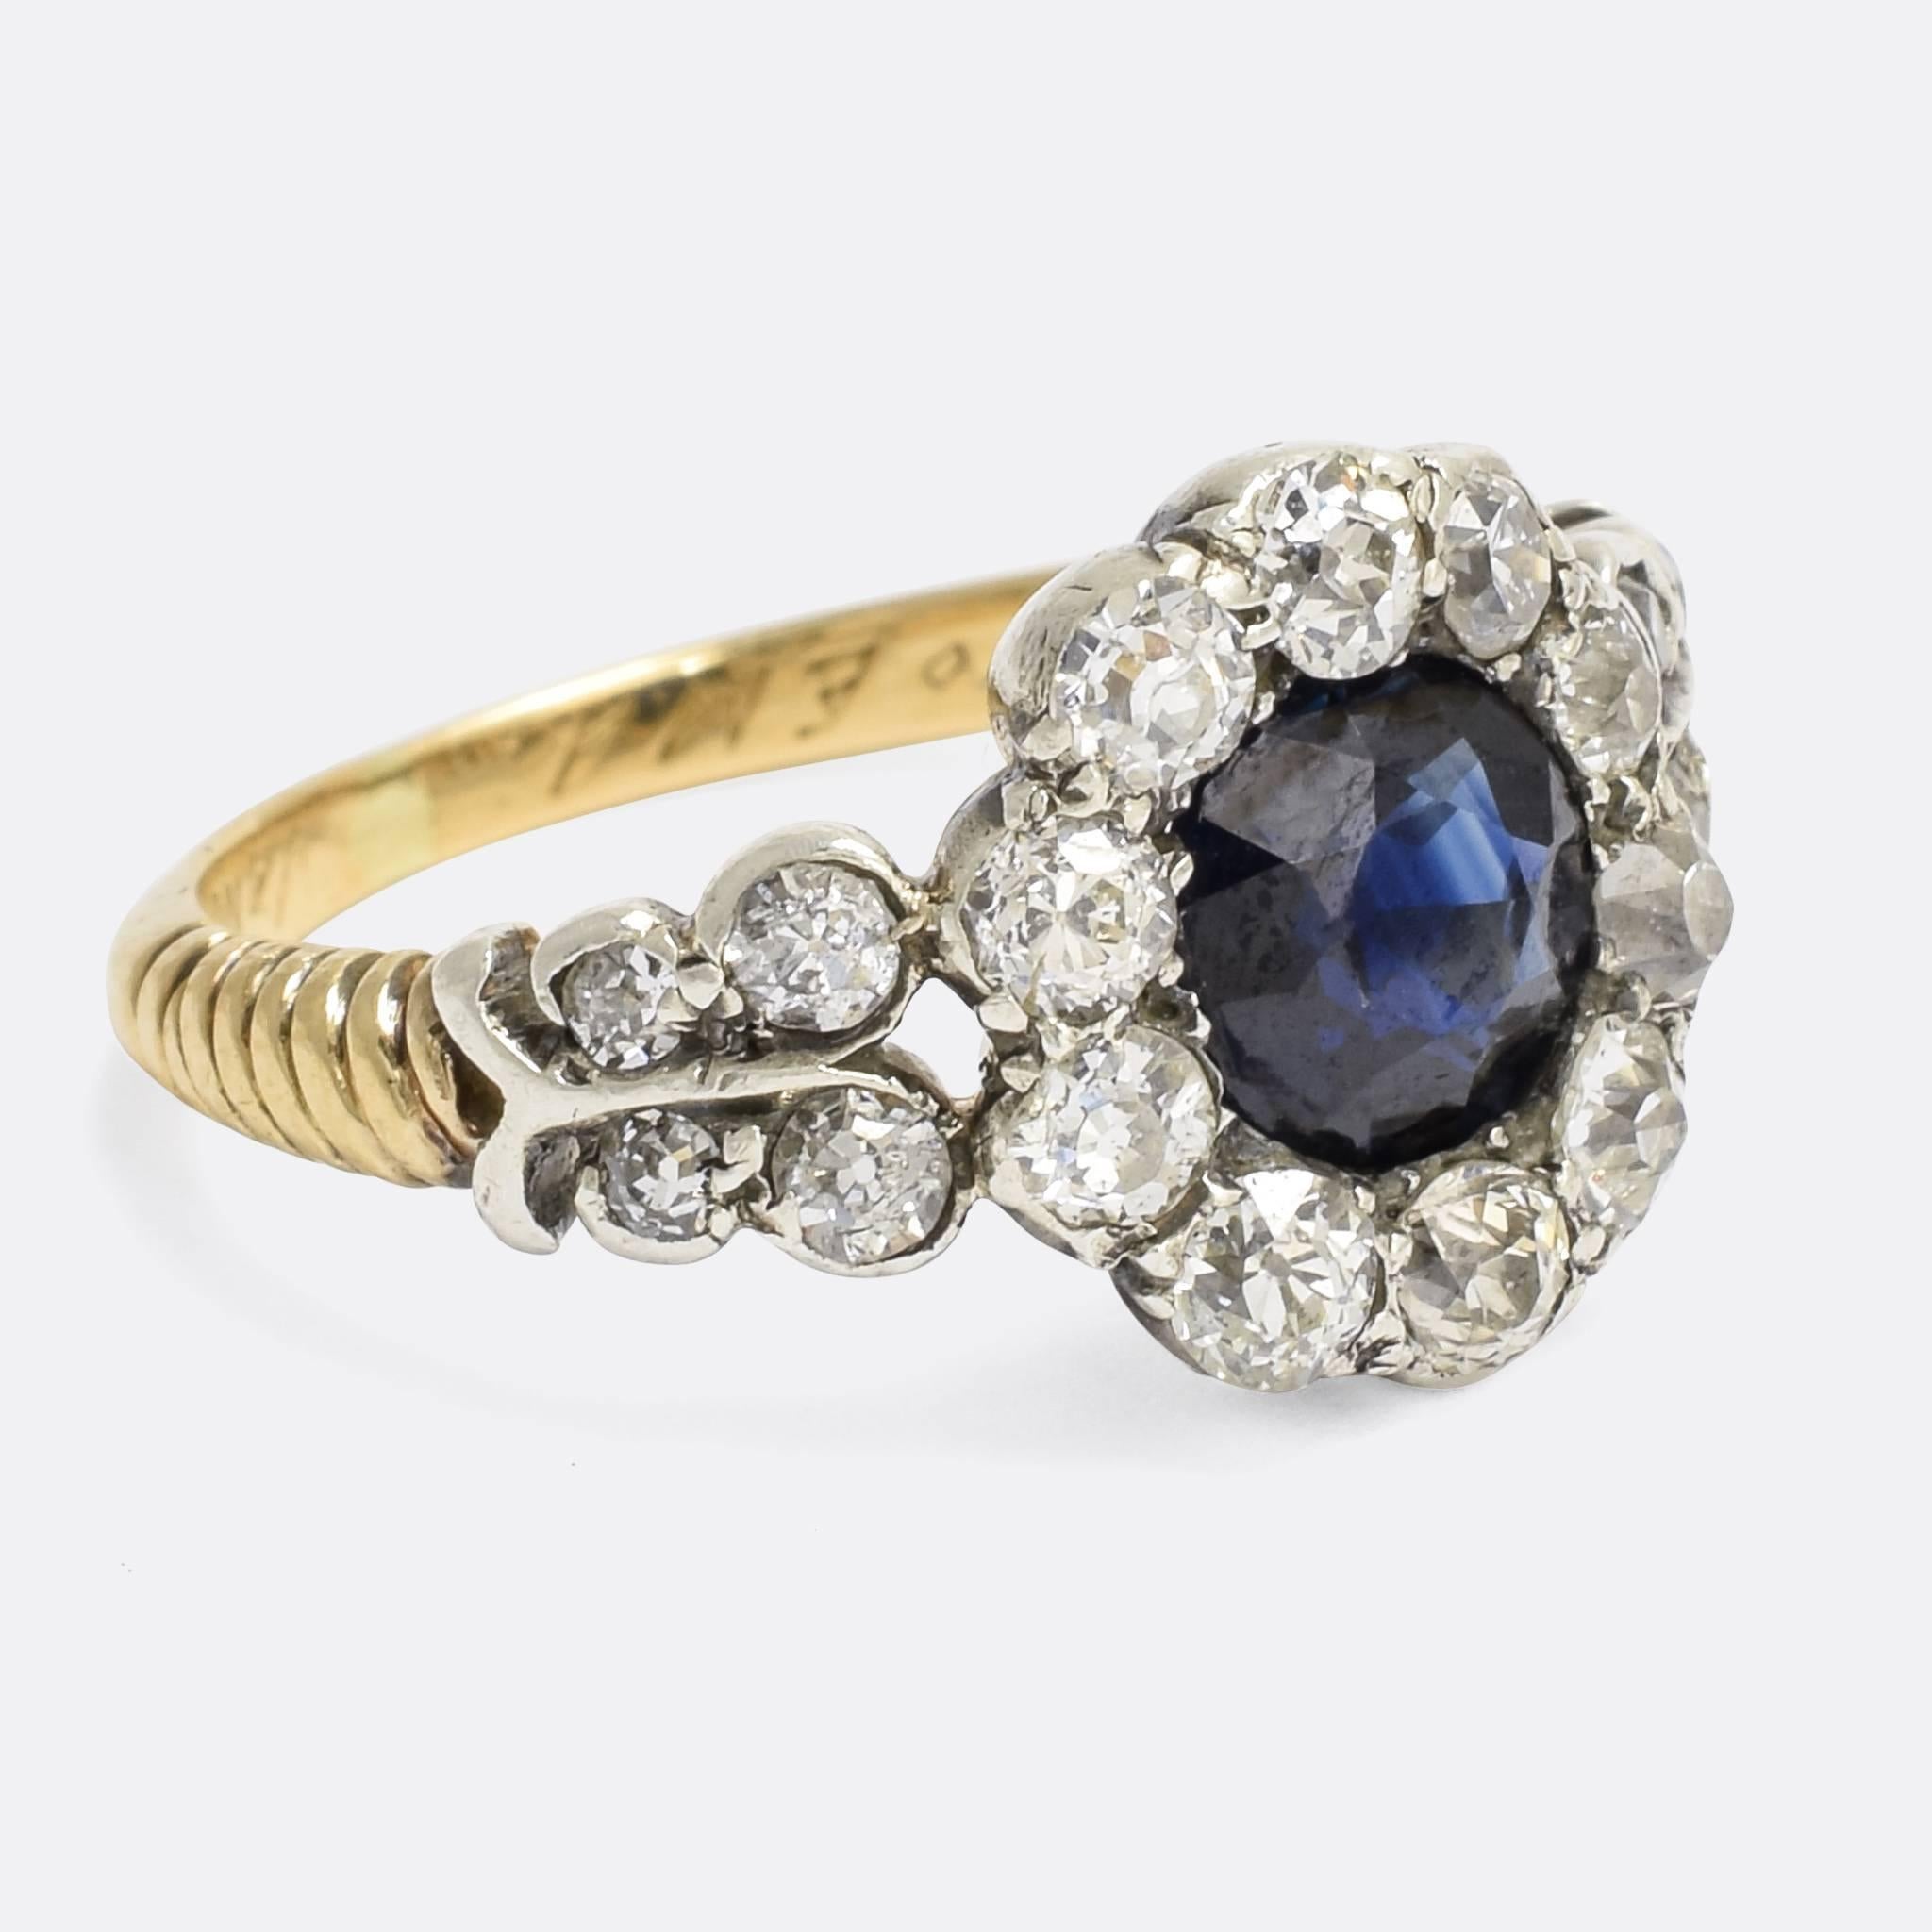 A superb antique cluster ring, set with a central blue sapphire and around three quarters of a carat of bright old mine cut diamonds. Modelled in 15k gold with silver settings, the shoulders are each accented with four diamonds, and the band